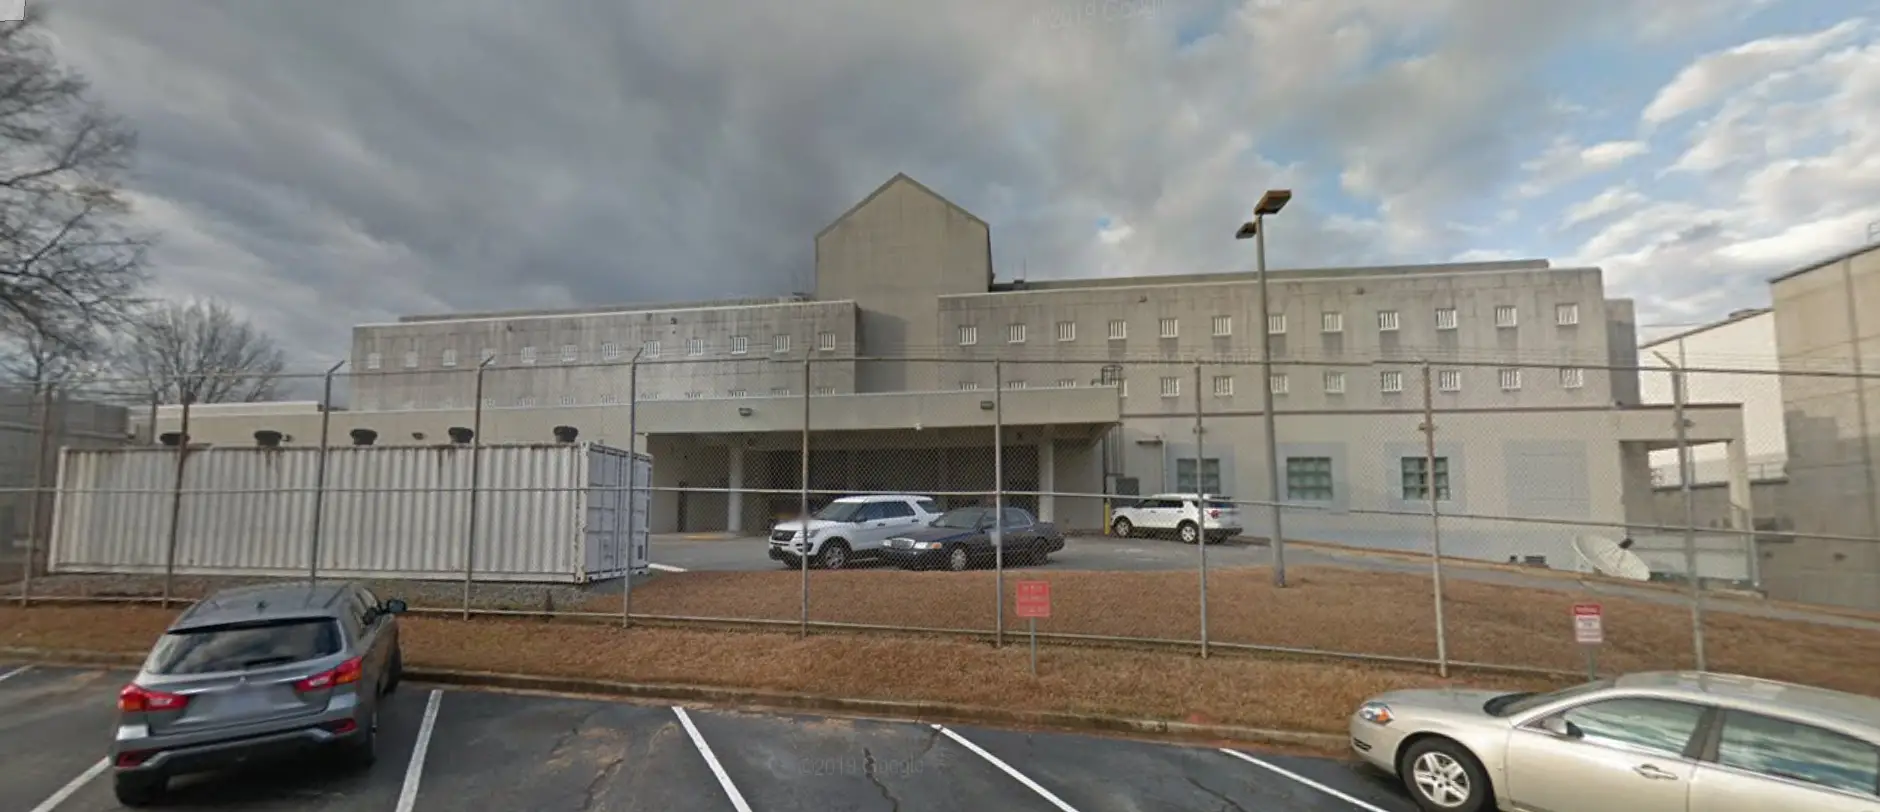 Photos Greenville County Detention 'Building 2' 1